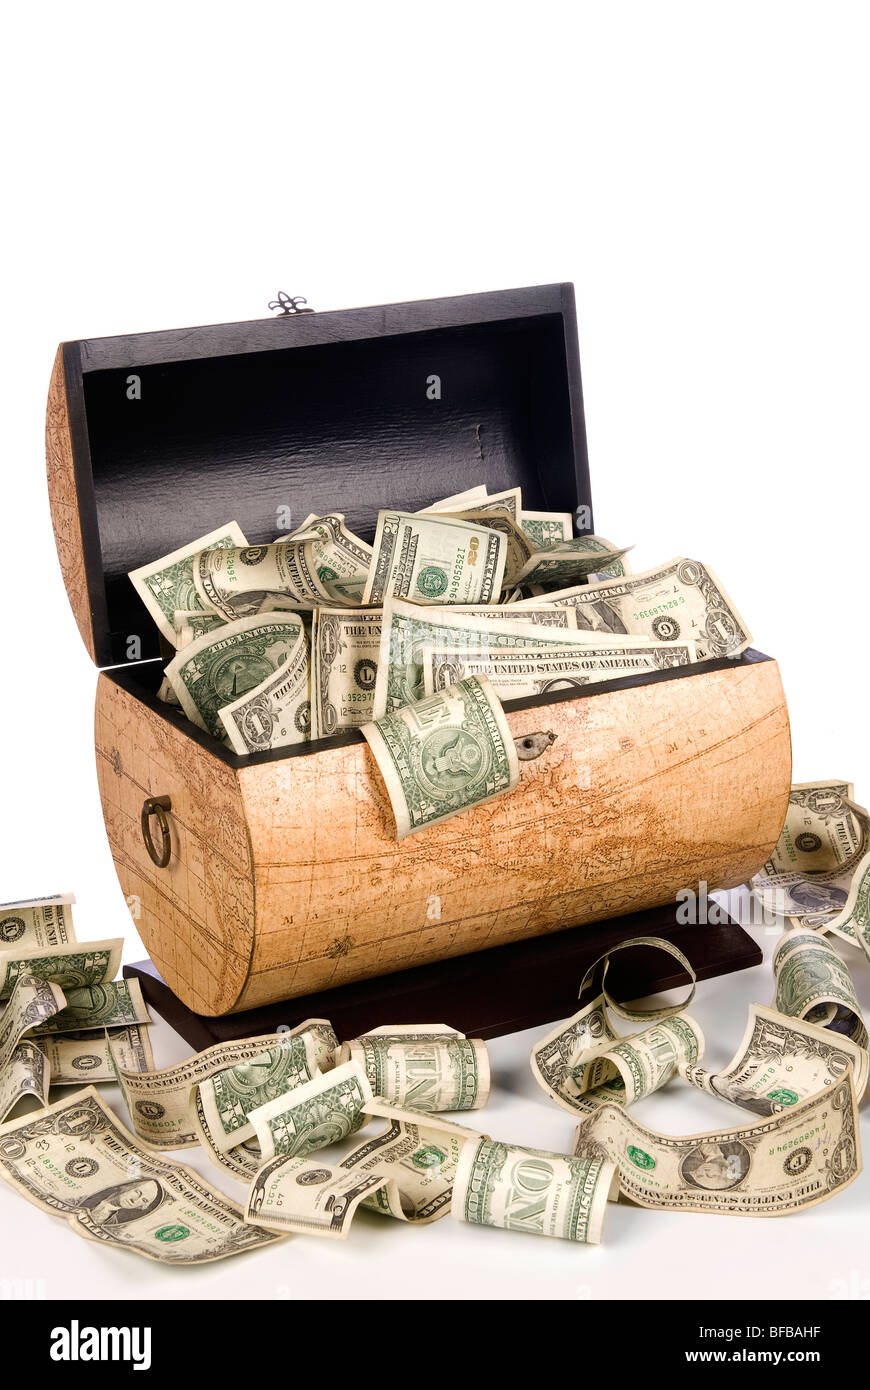 A cash box full of spilling money is good for economic, savings, financial and savings inferences. Stock Photo